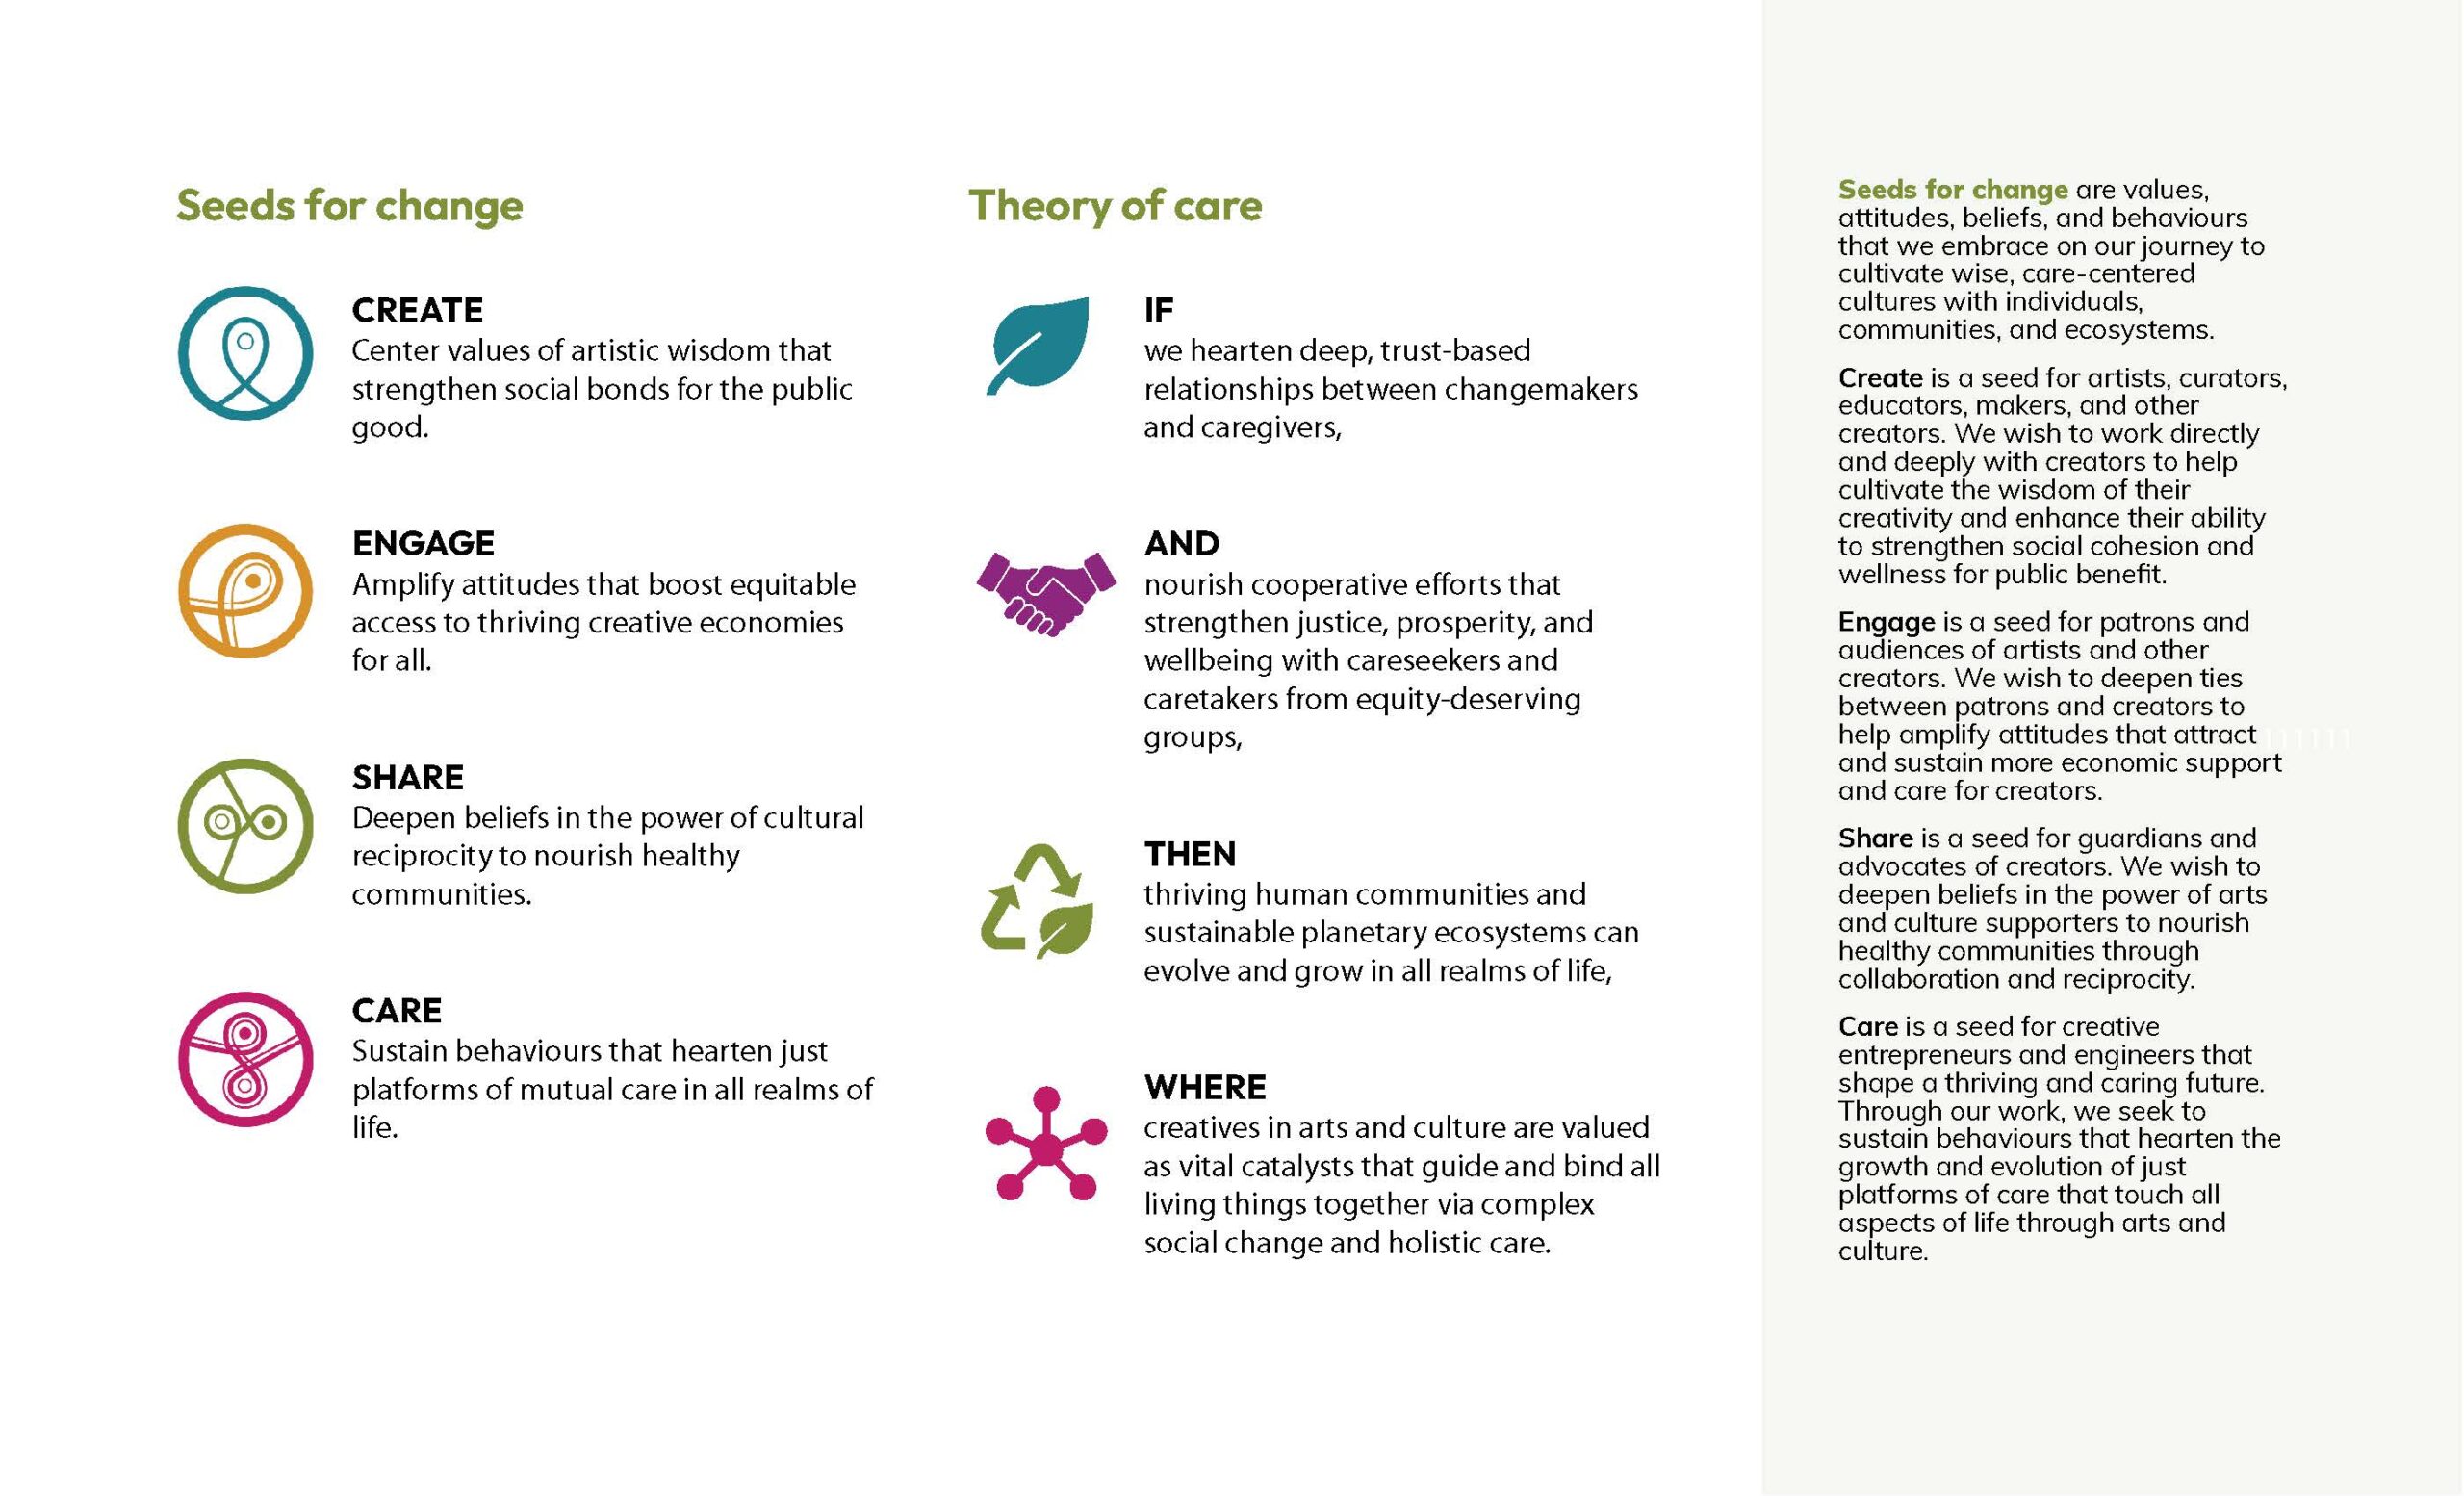 Seeds for change and Theory of care